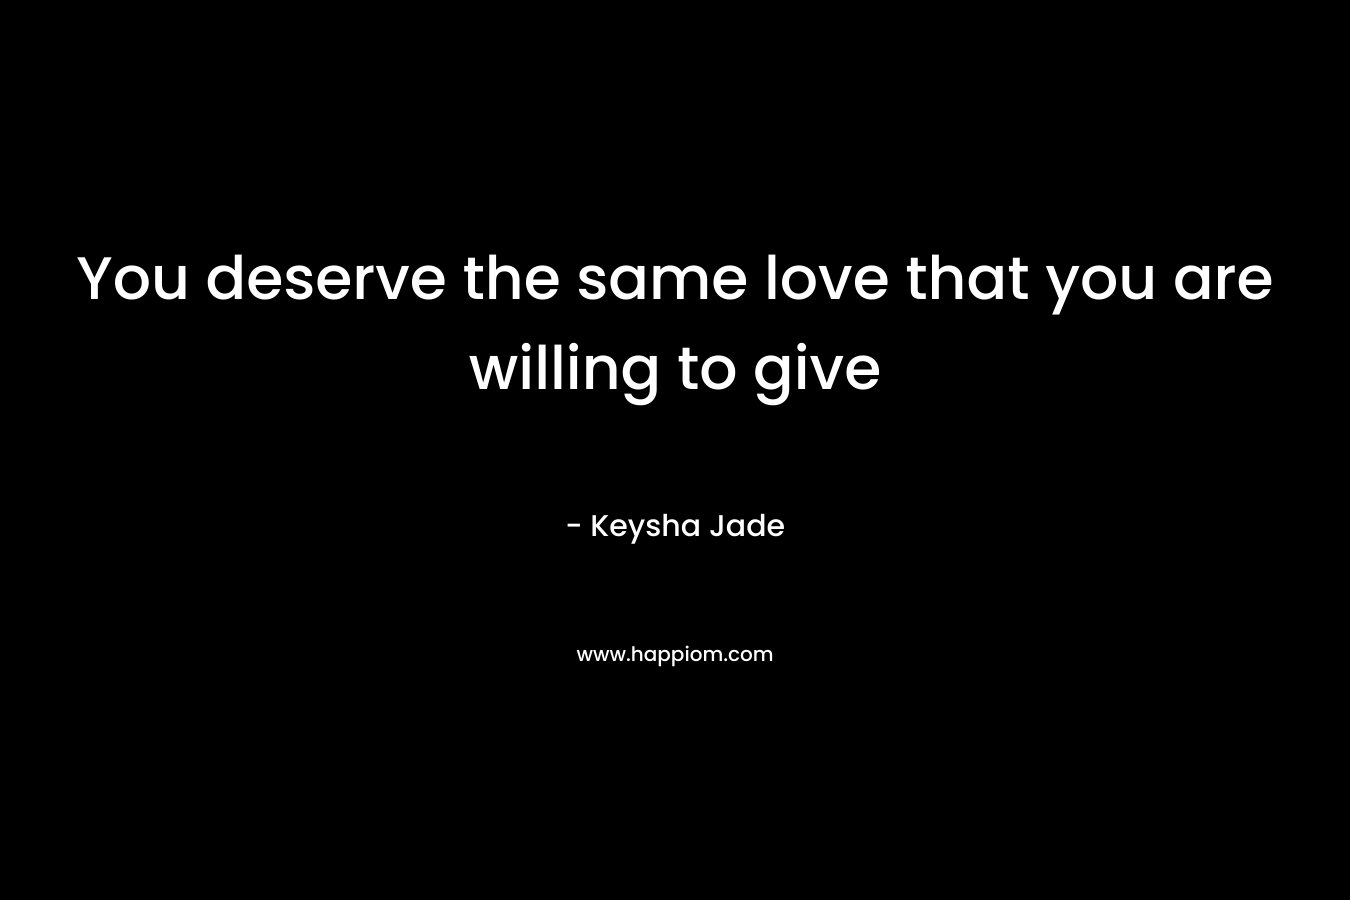 You deserve the same love that you are willing to give – Keysha Jade